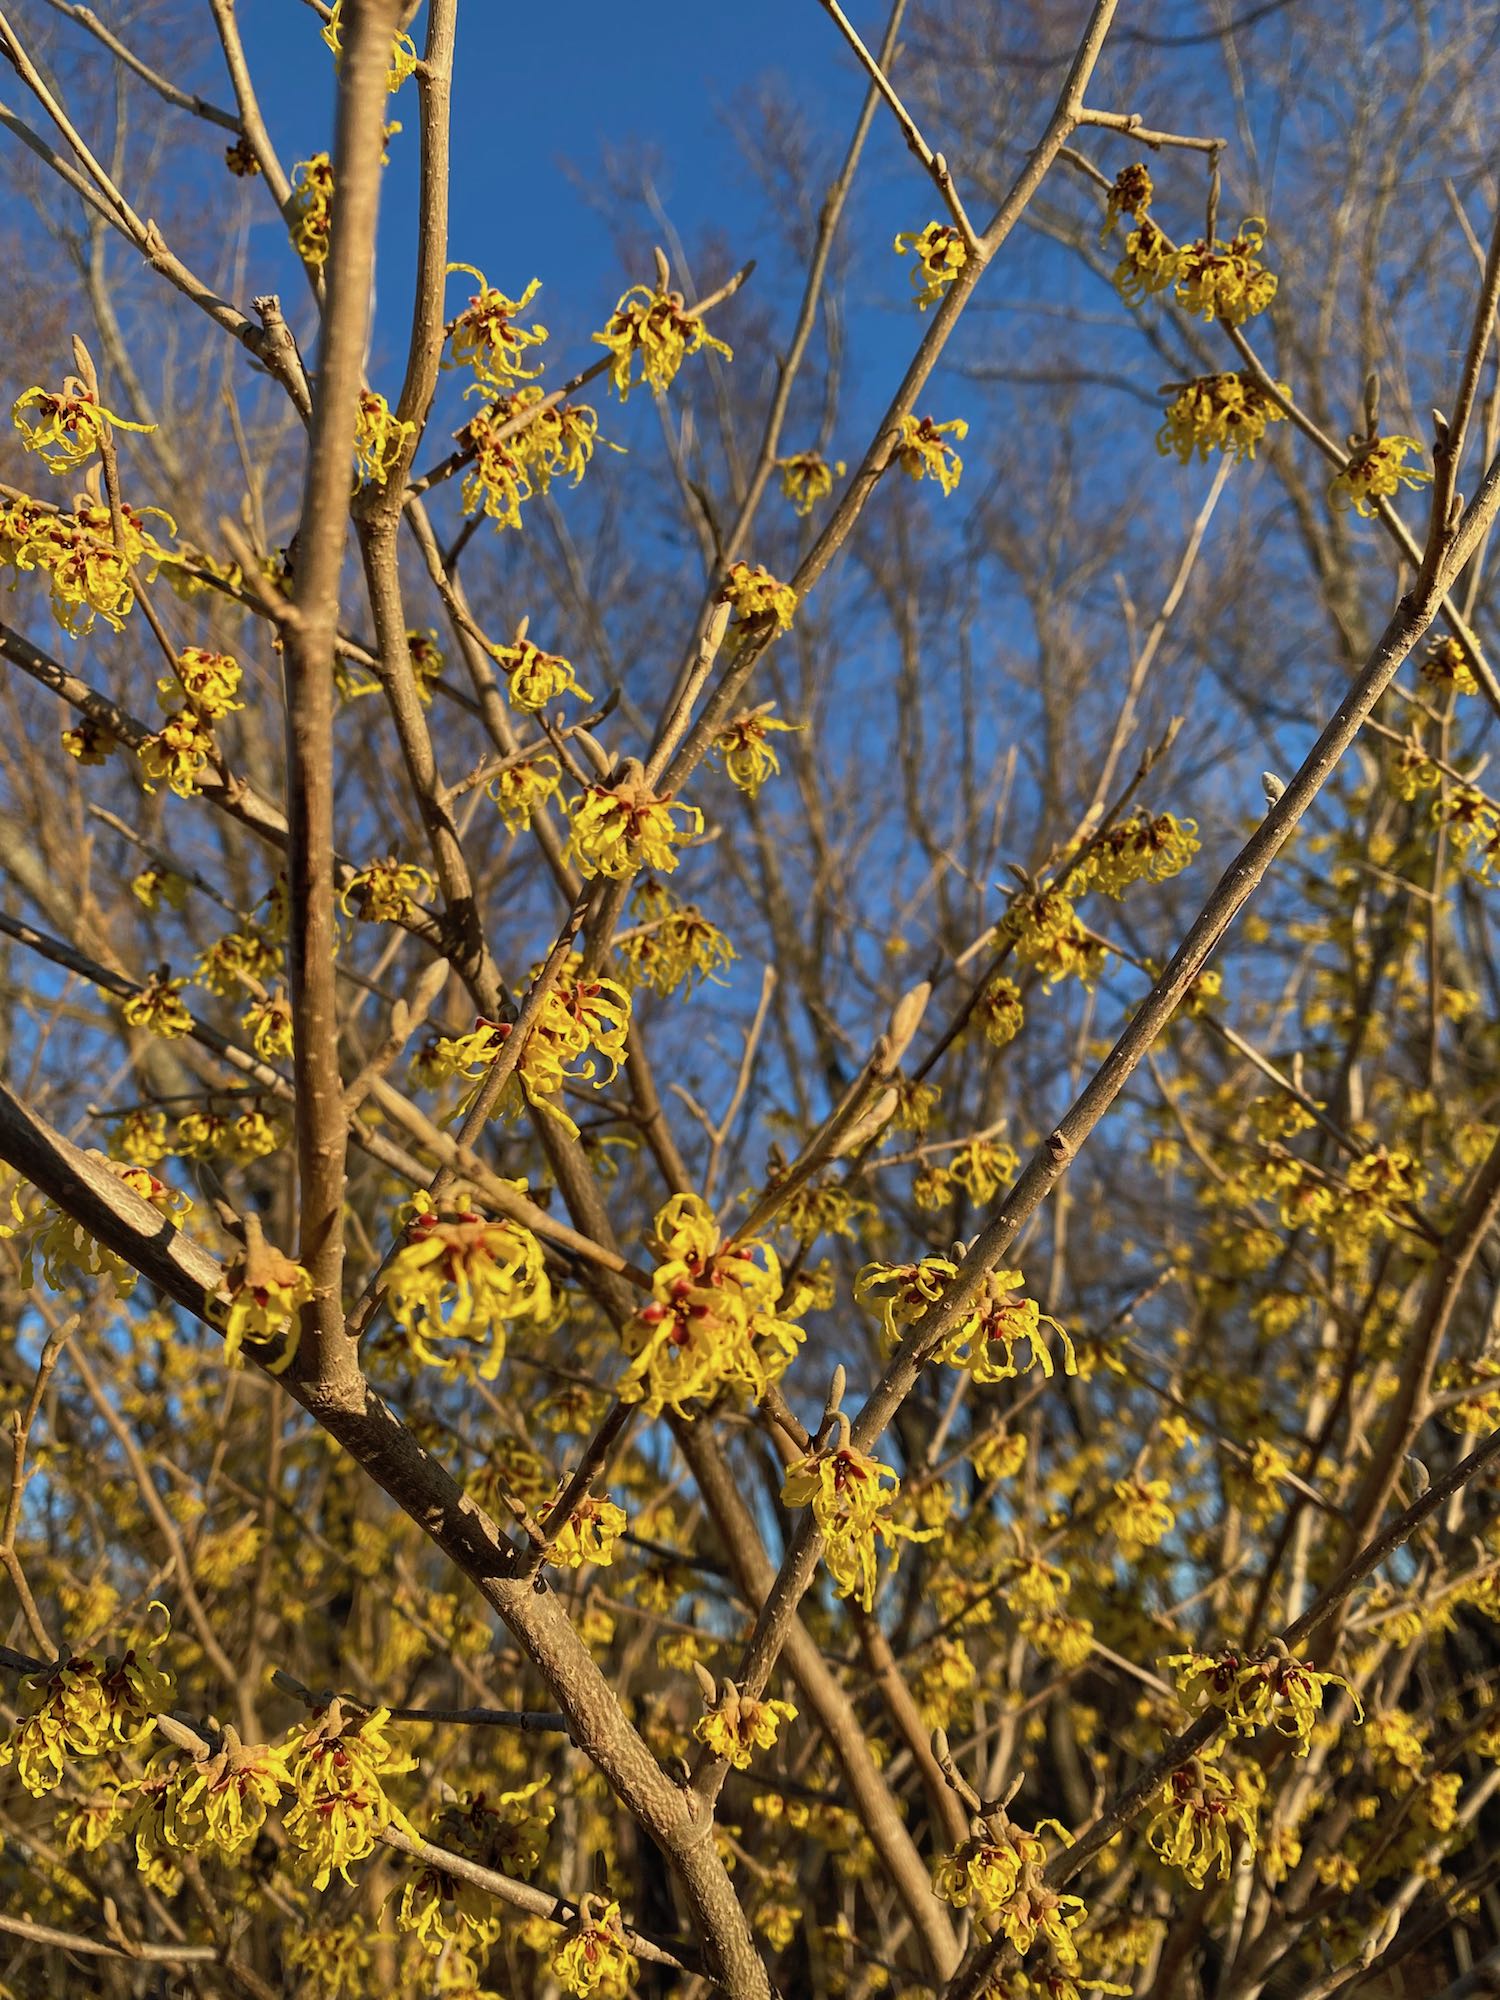 It's the weekend! Number 240, Witch Hazel in bloom at the Arlington Reservoir